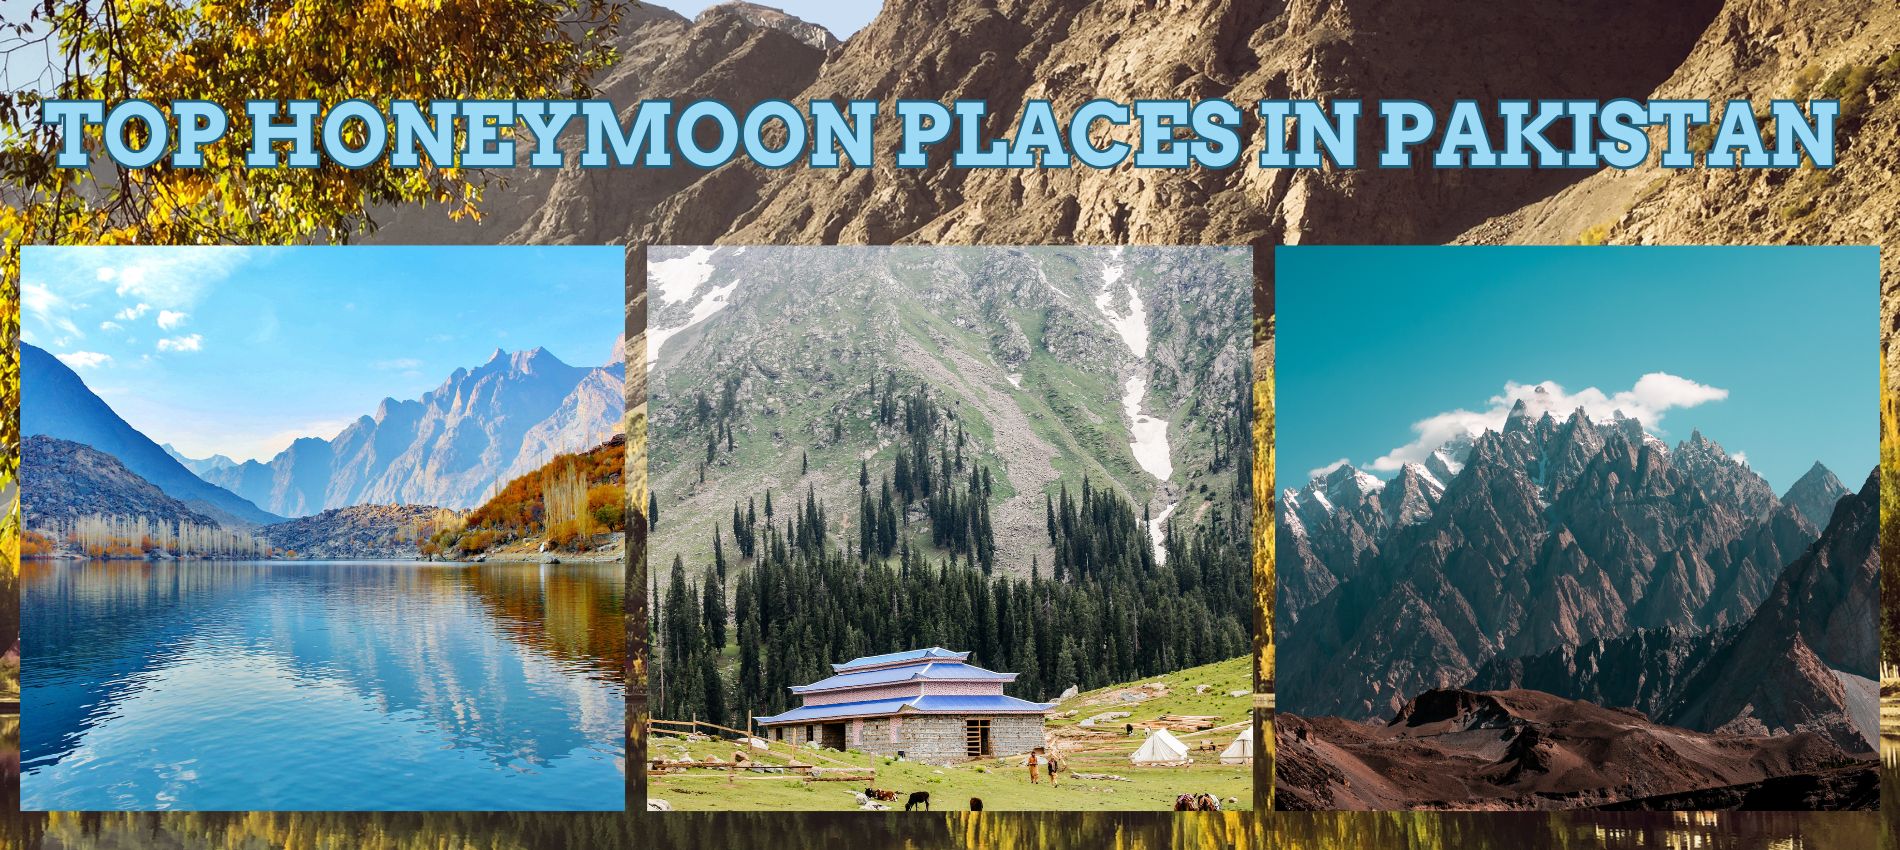 Top honeymoon places in Pakistan: Best places for couples in Pakistan